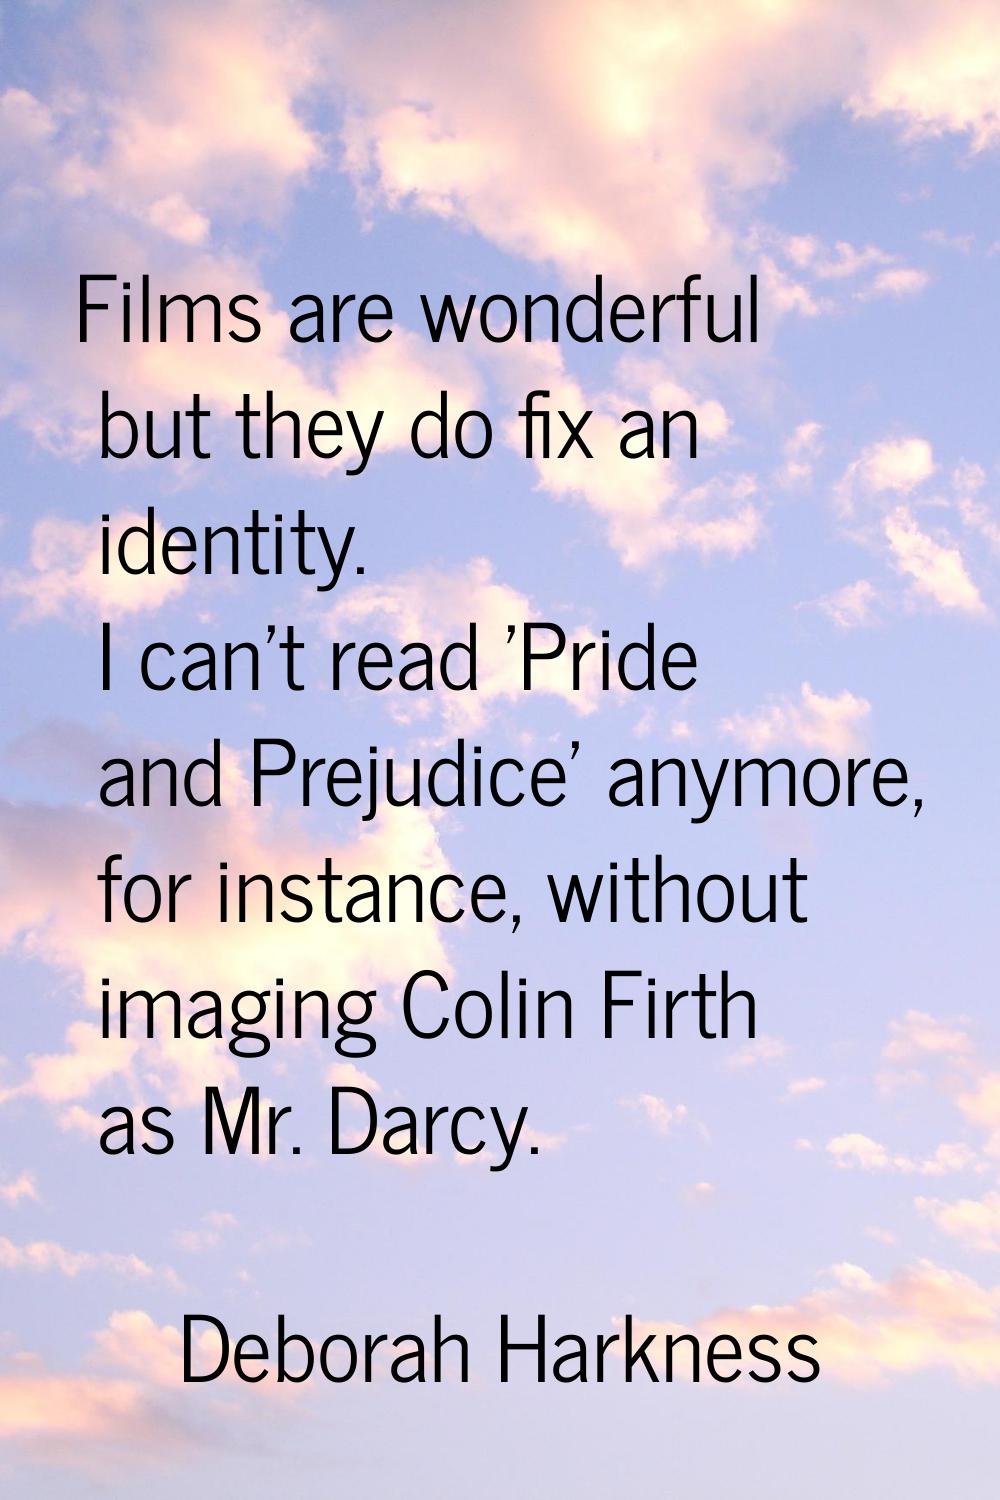 Films are wonderful but they do fix an identity. I can't read 'Pride and Prejudice' anymore, for in